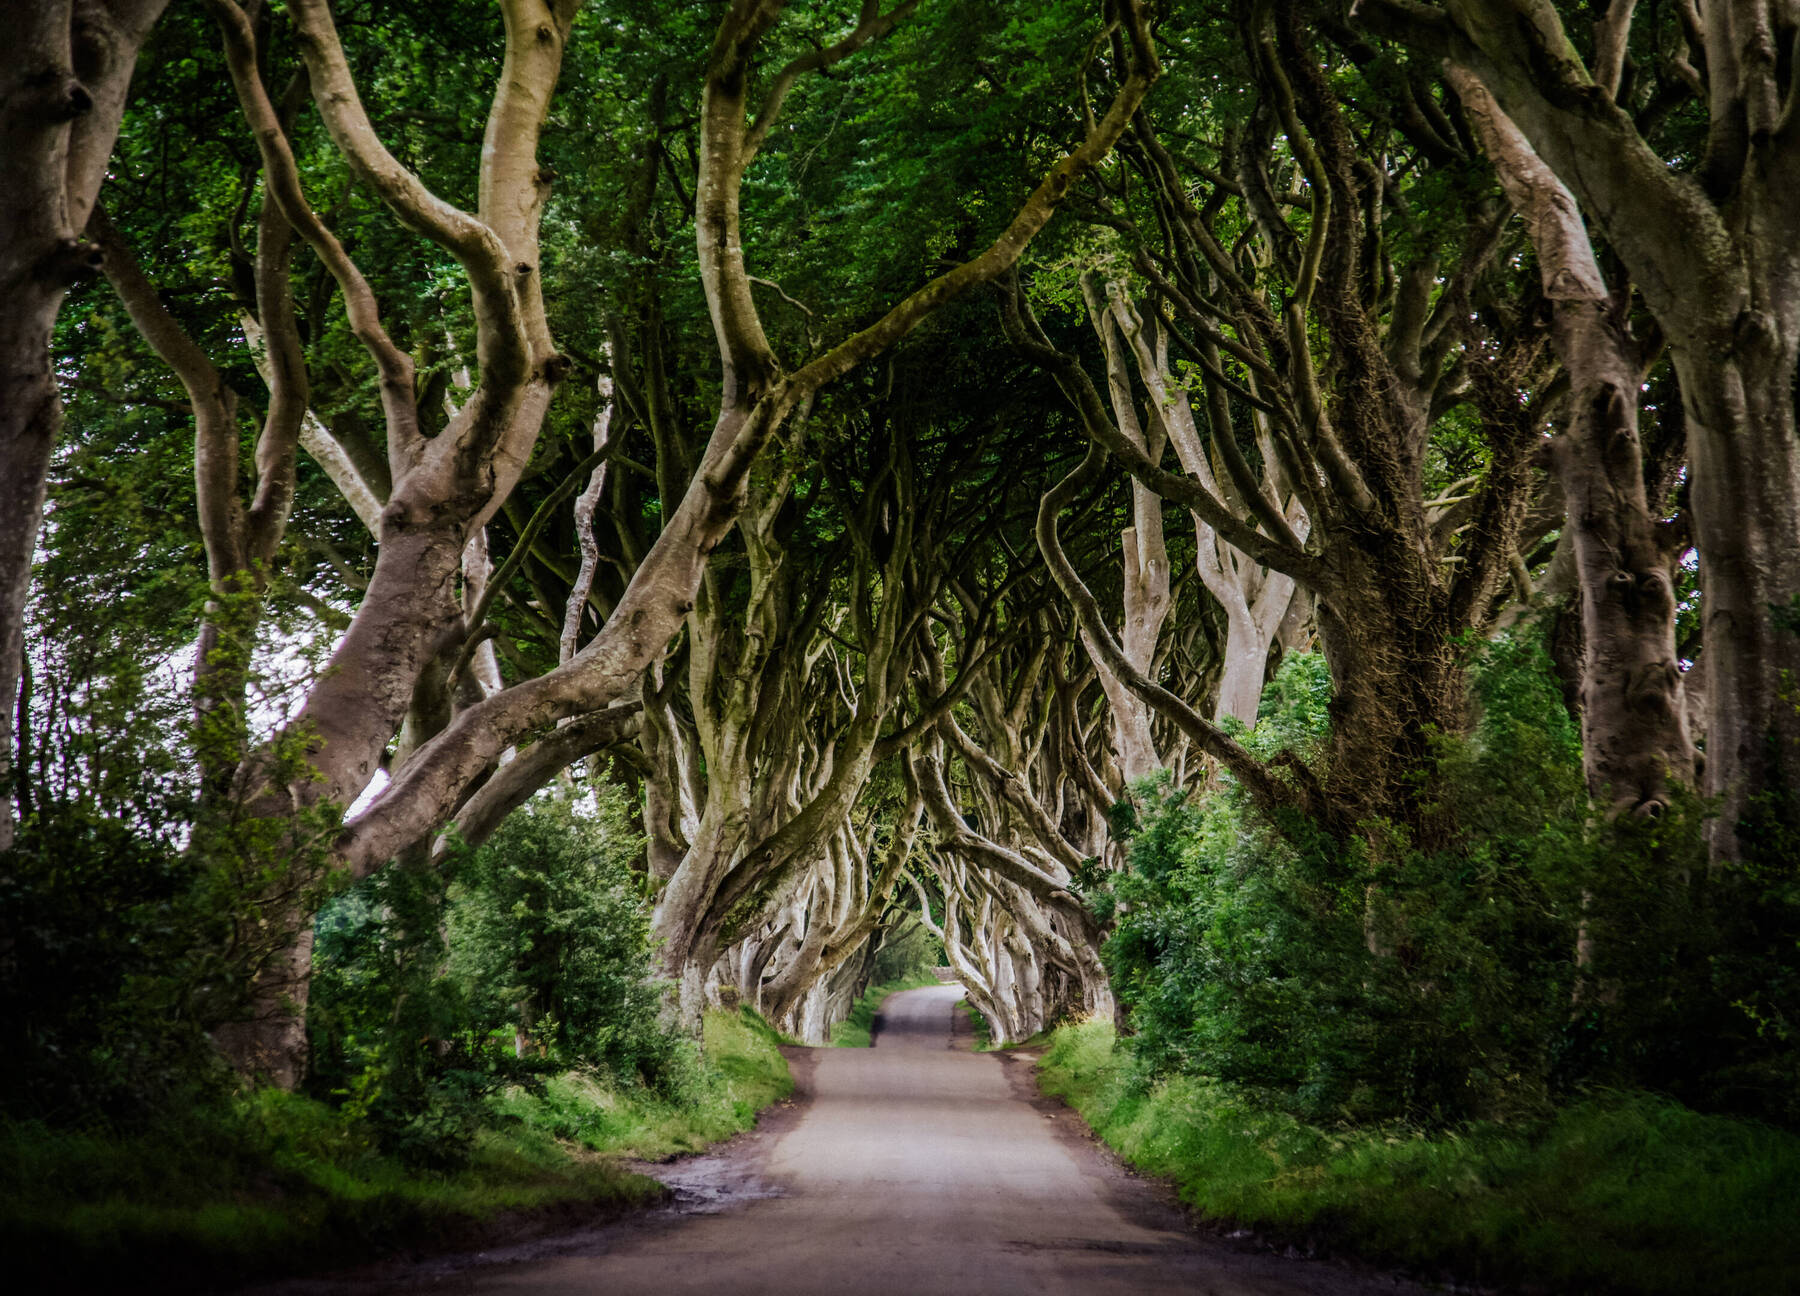 Wild about Westeros? Discover Northern Ireland